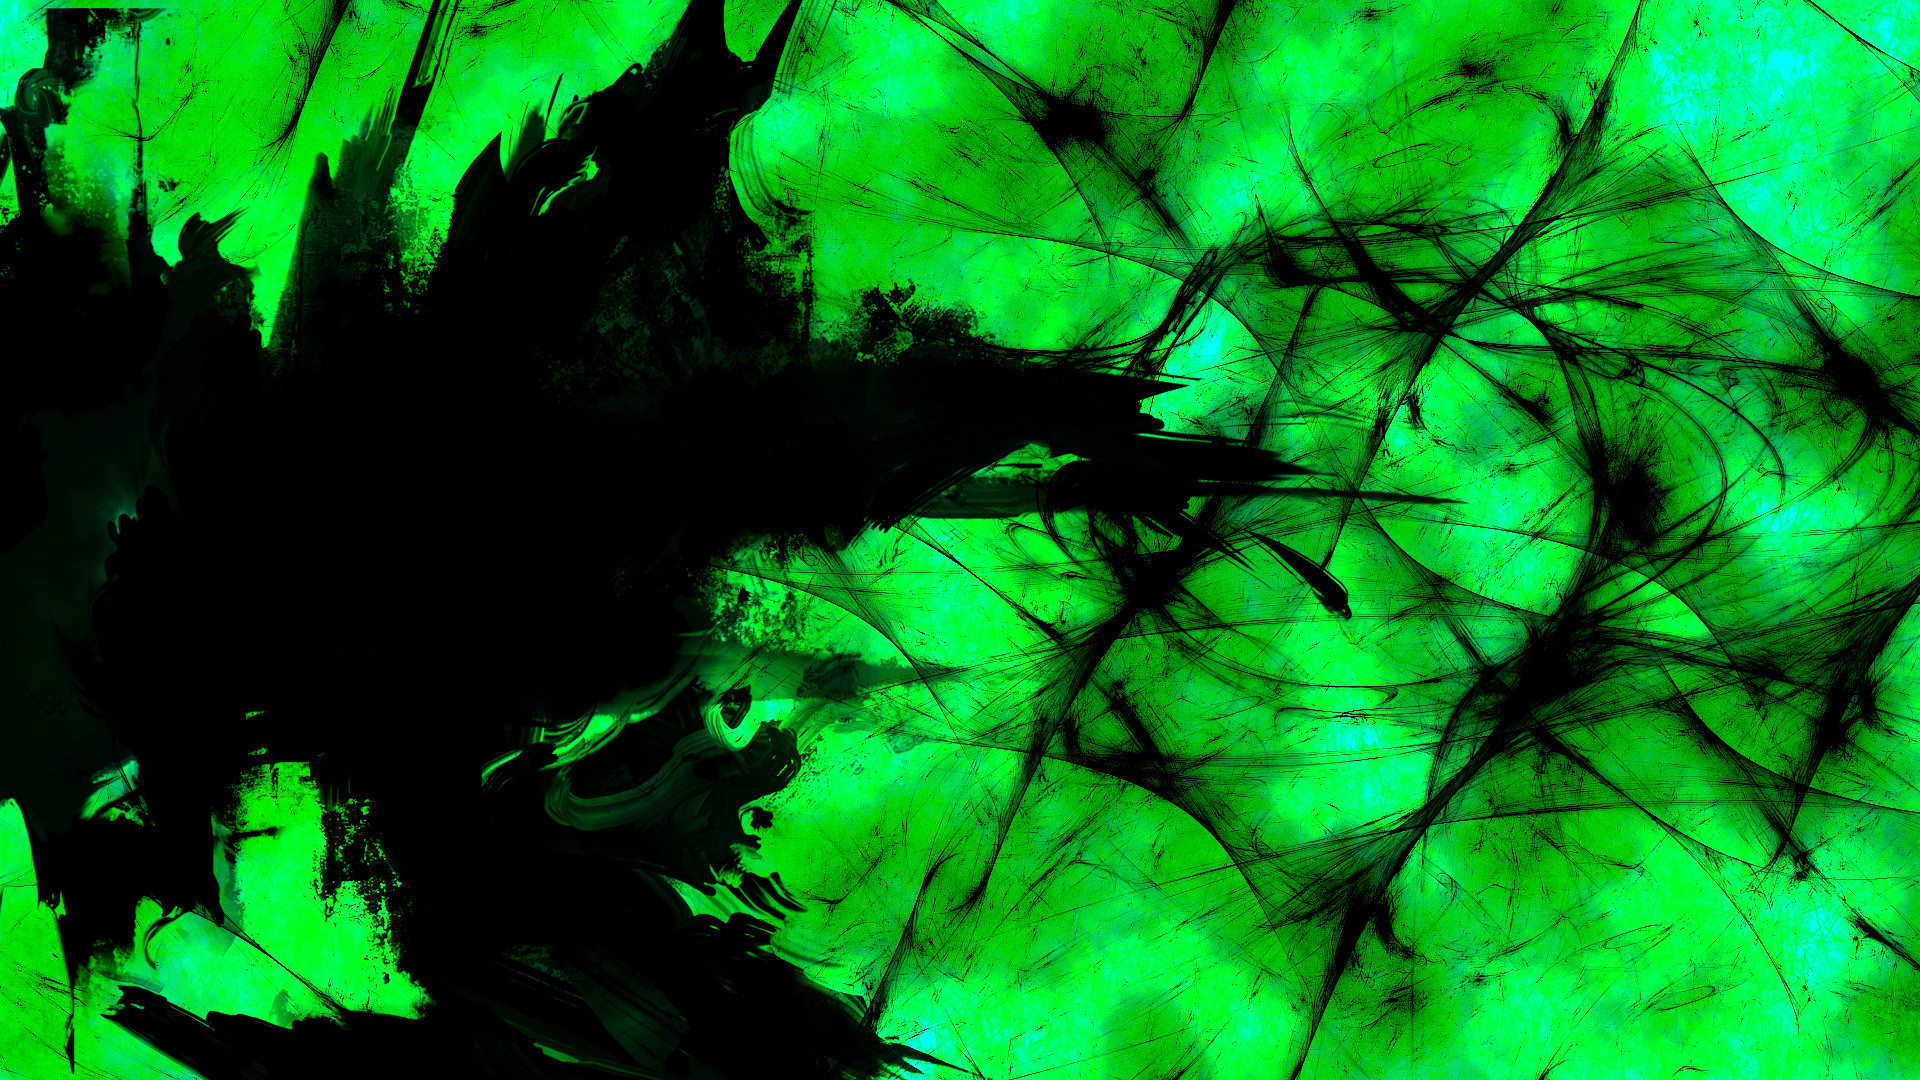 1920x1080 ... Green Abstract, Desktop Screen Backgrounds, Wall.Web PC Backgrounds ...